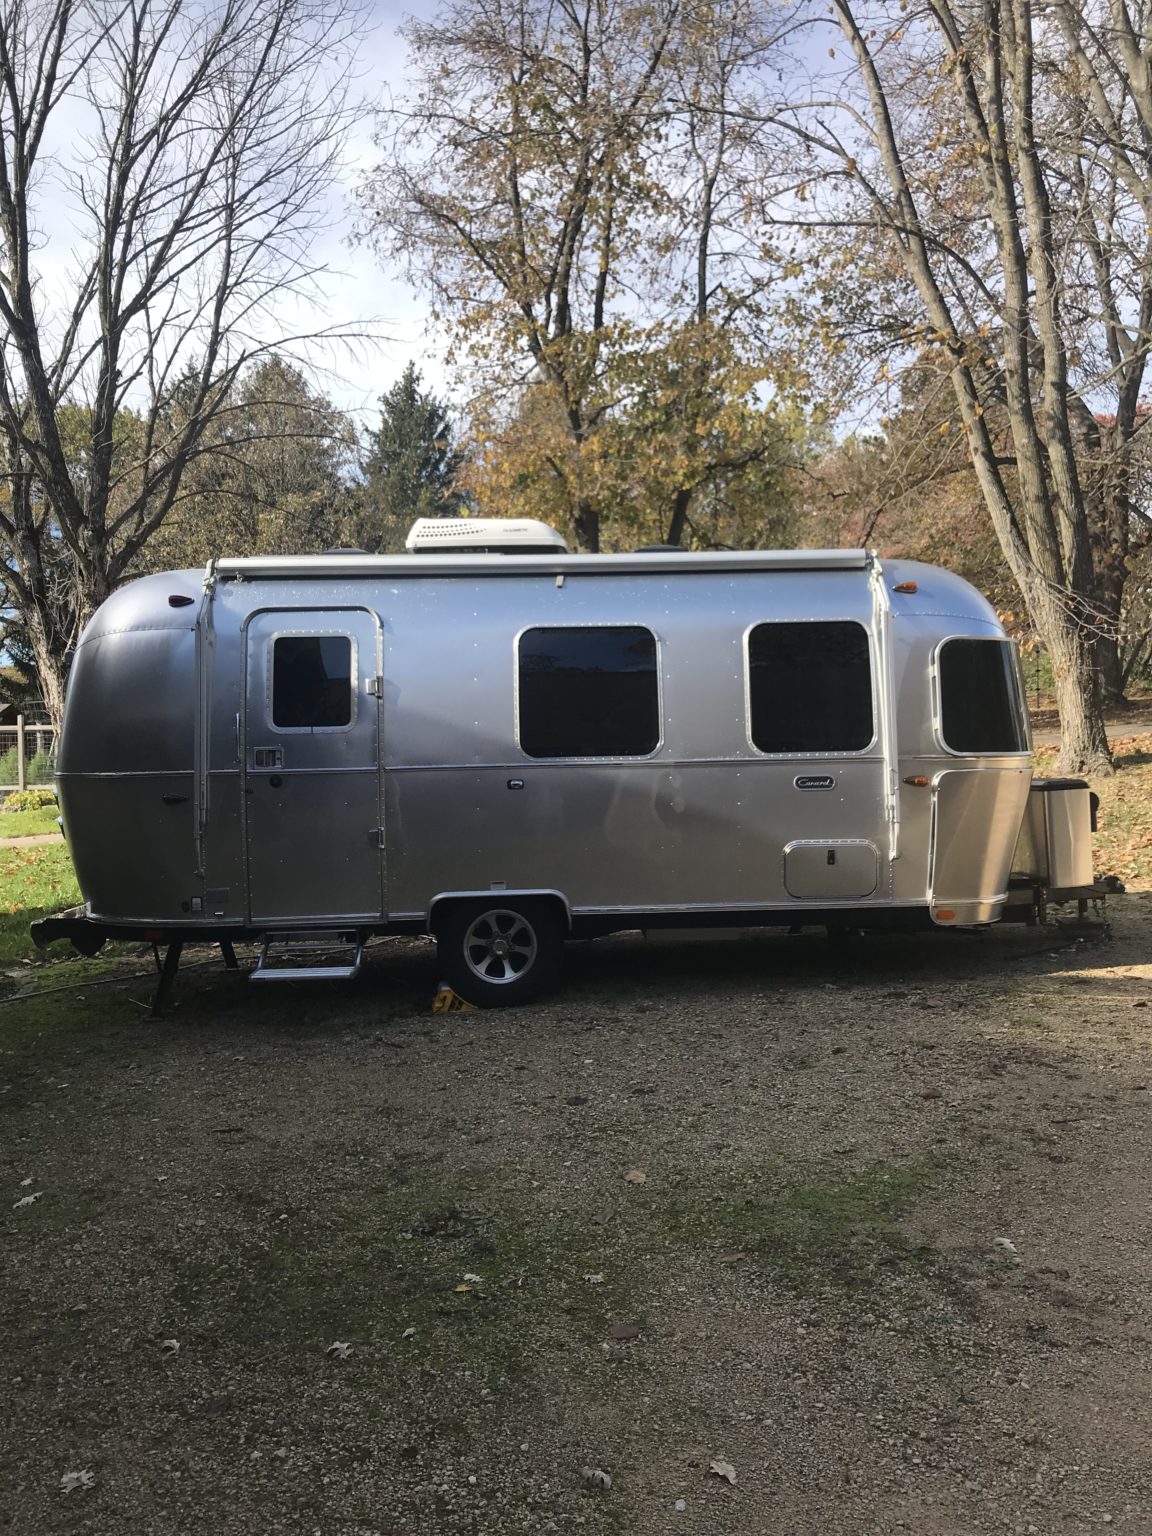 2020 Airstream 22FT Caravel For Sale in Apple River - Airstream Marketplace